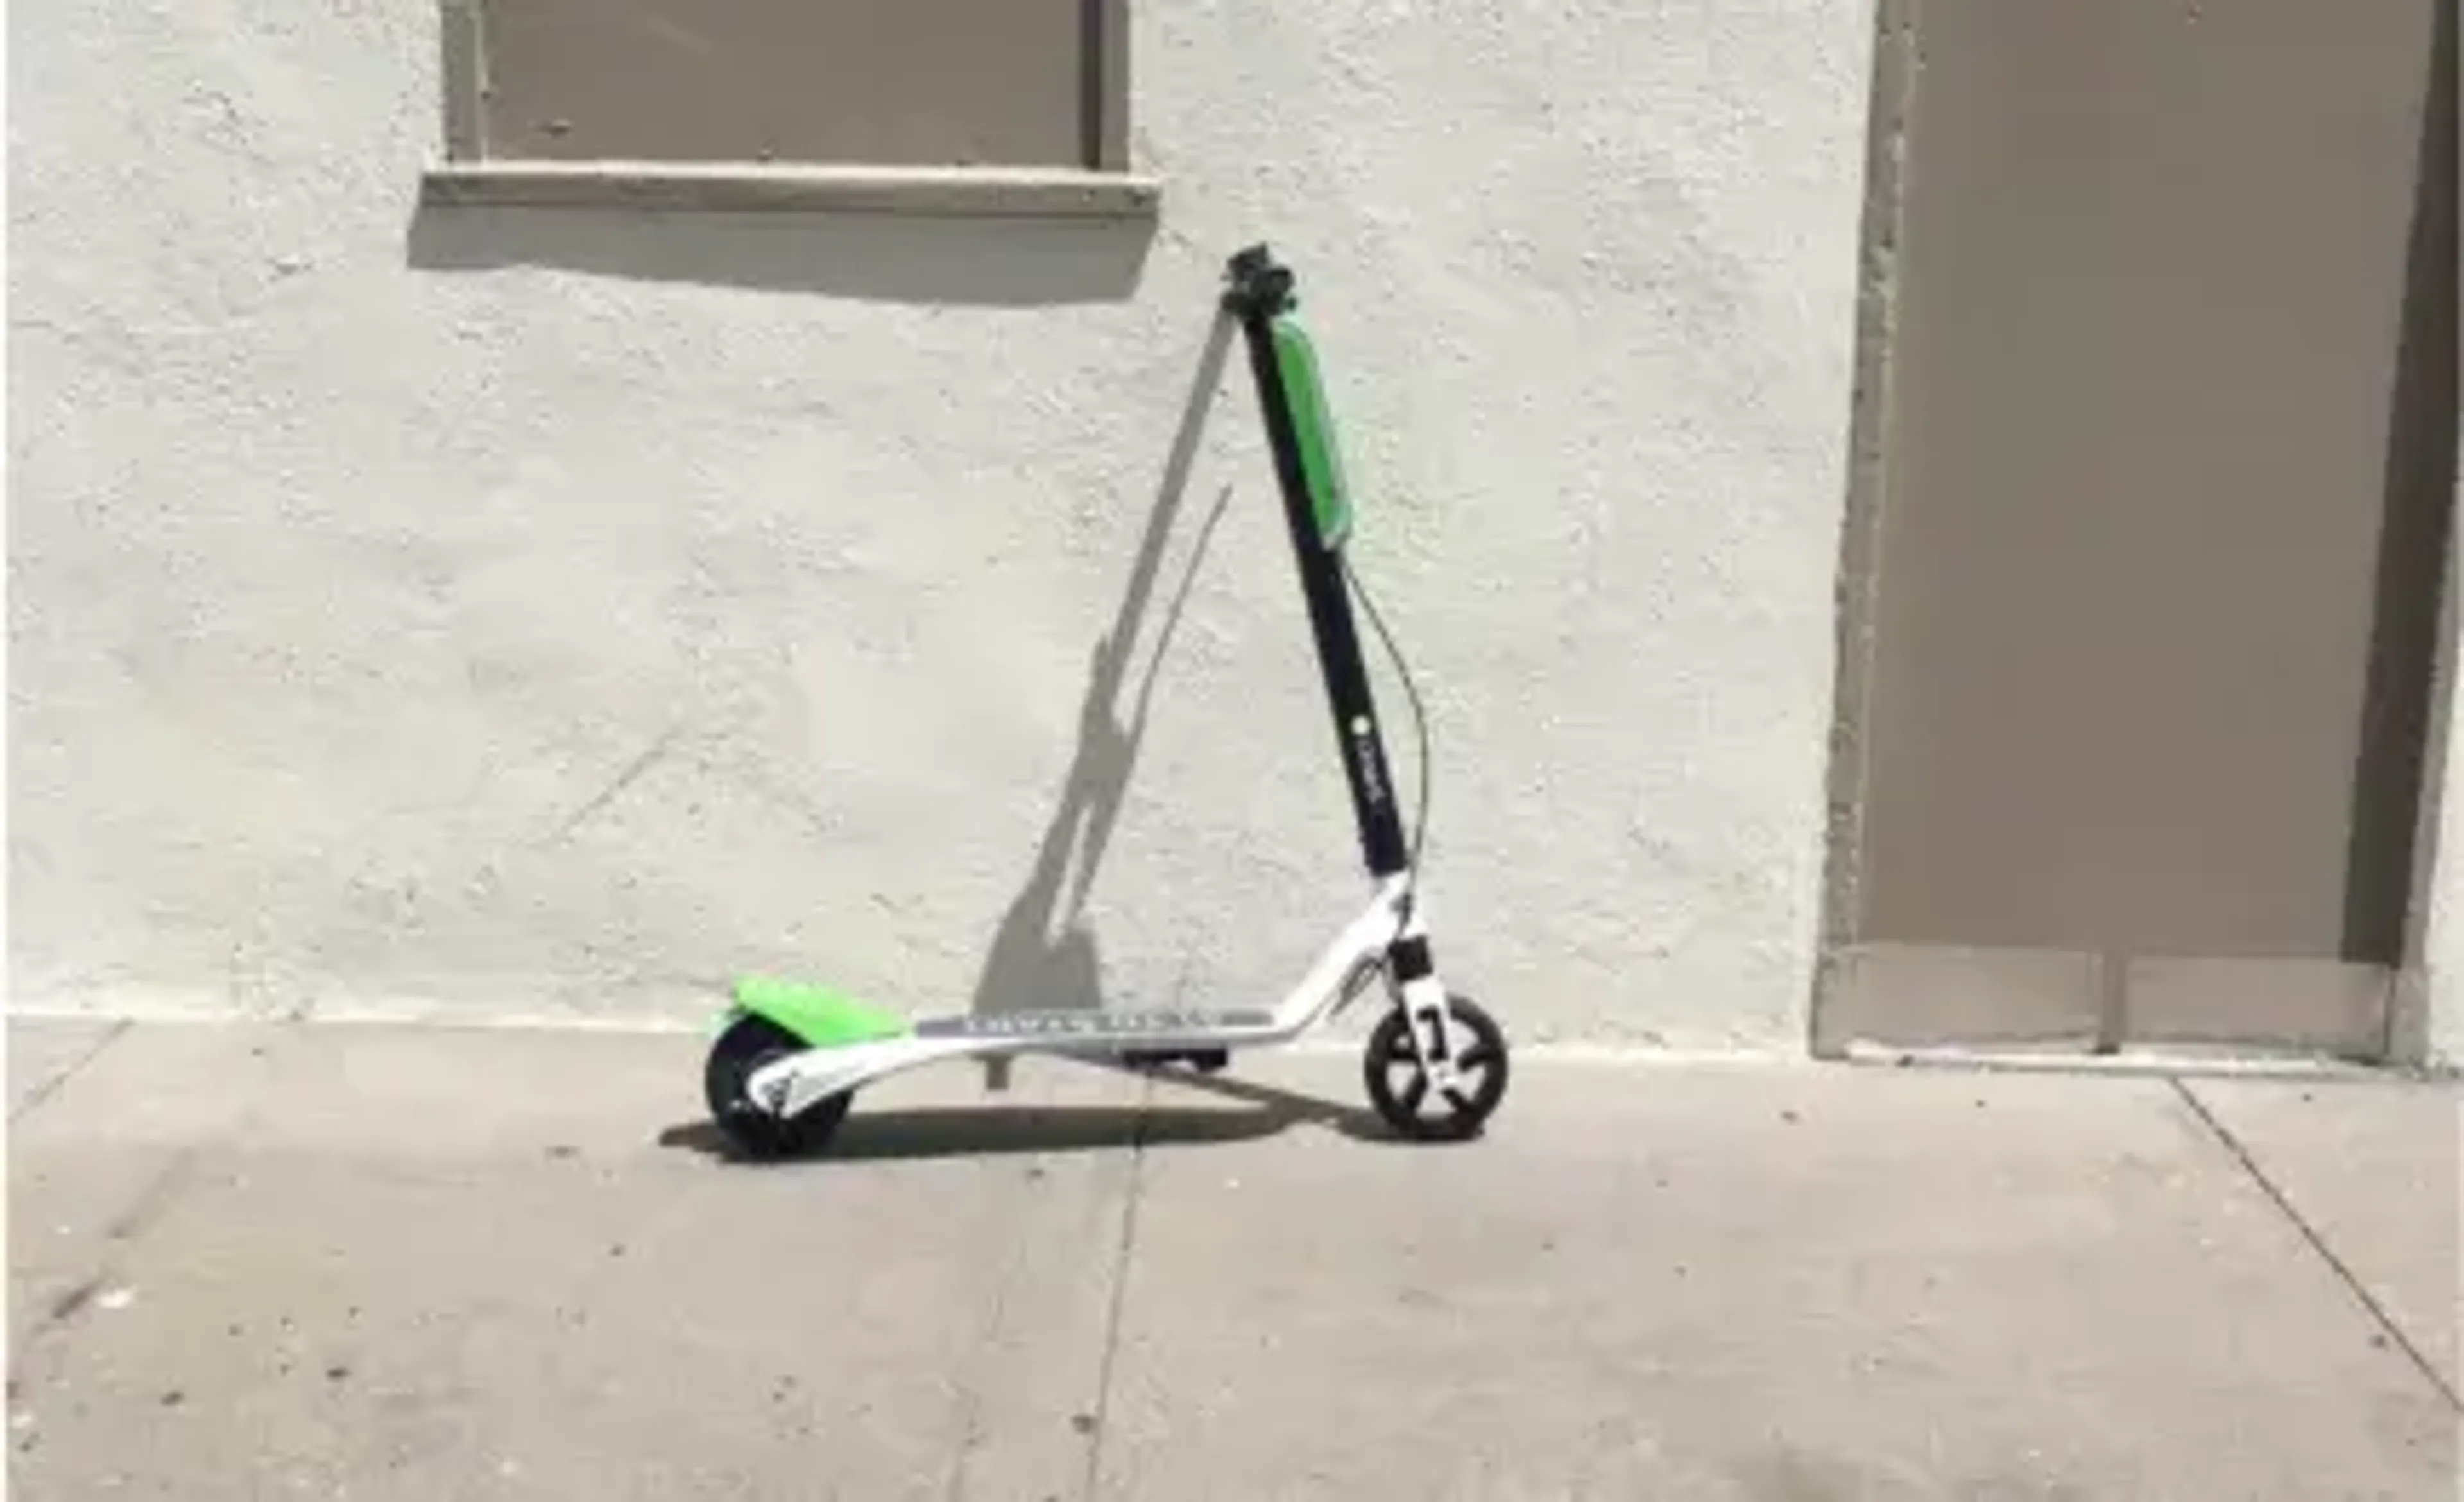 E scooter on the pavement